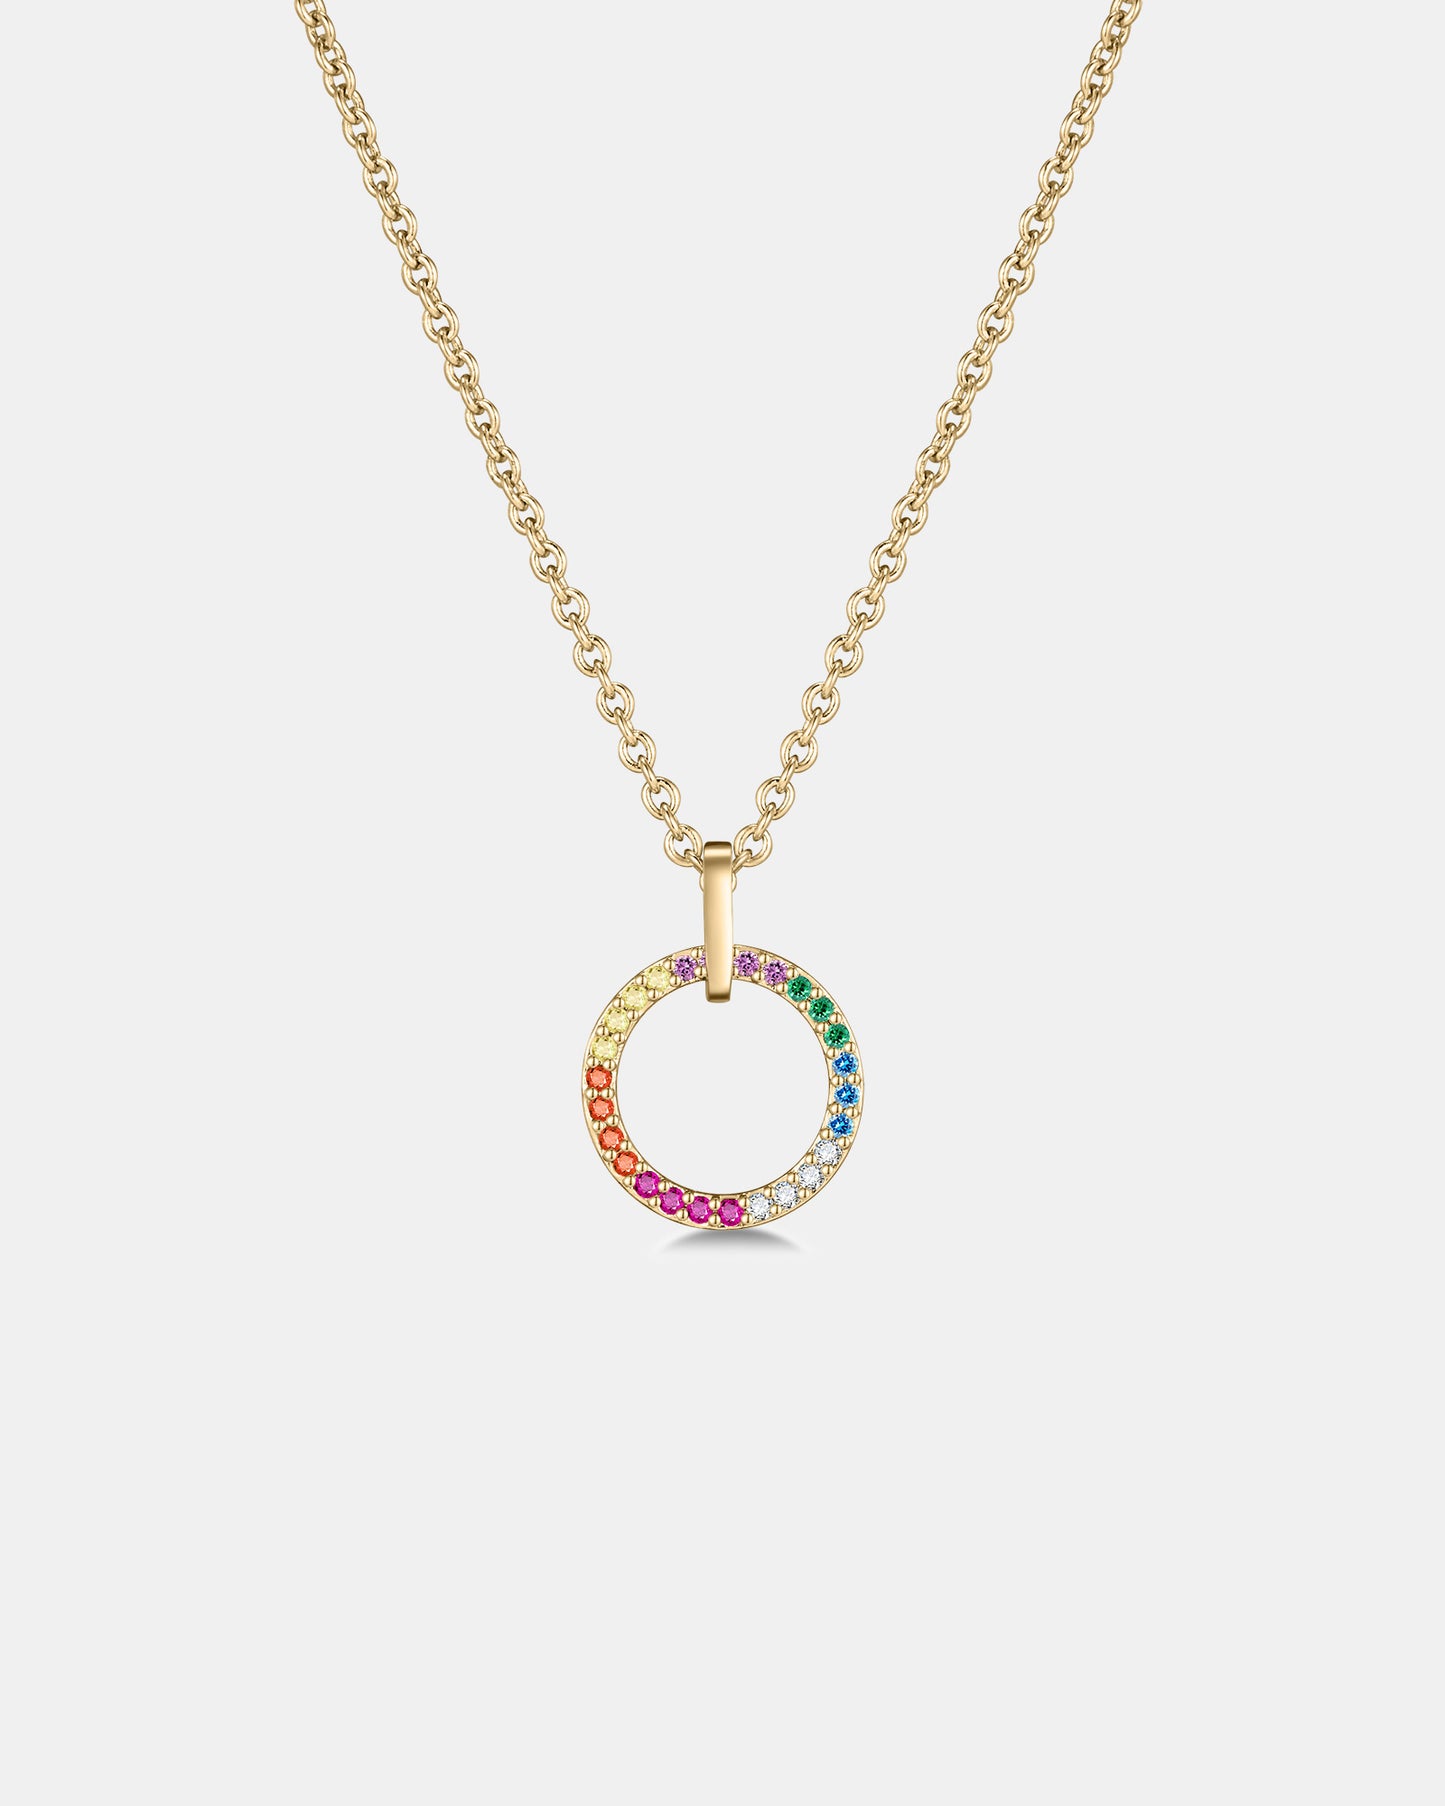 Vibrant Enchanted Necklace